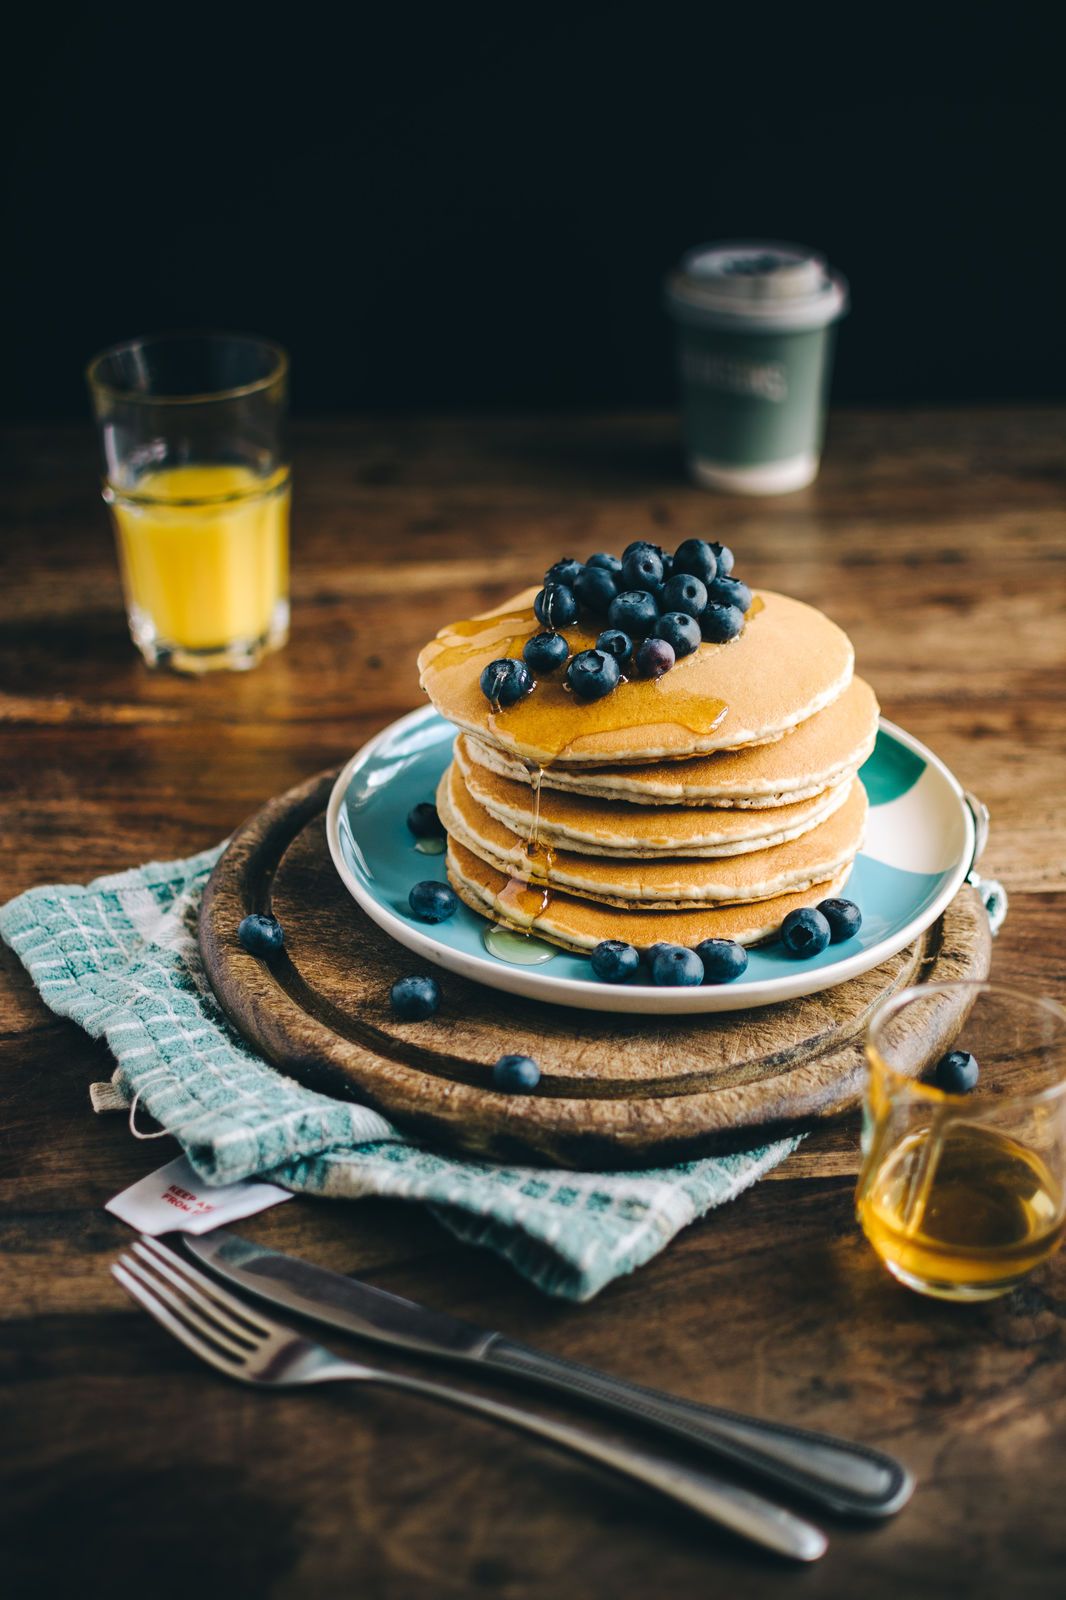 Food photos from the Unsplash Awards image 5